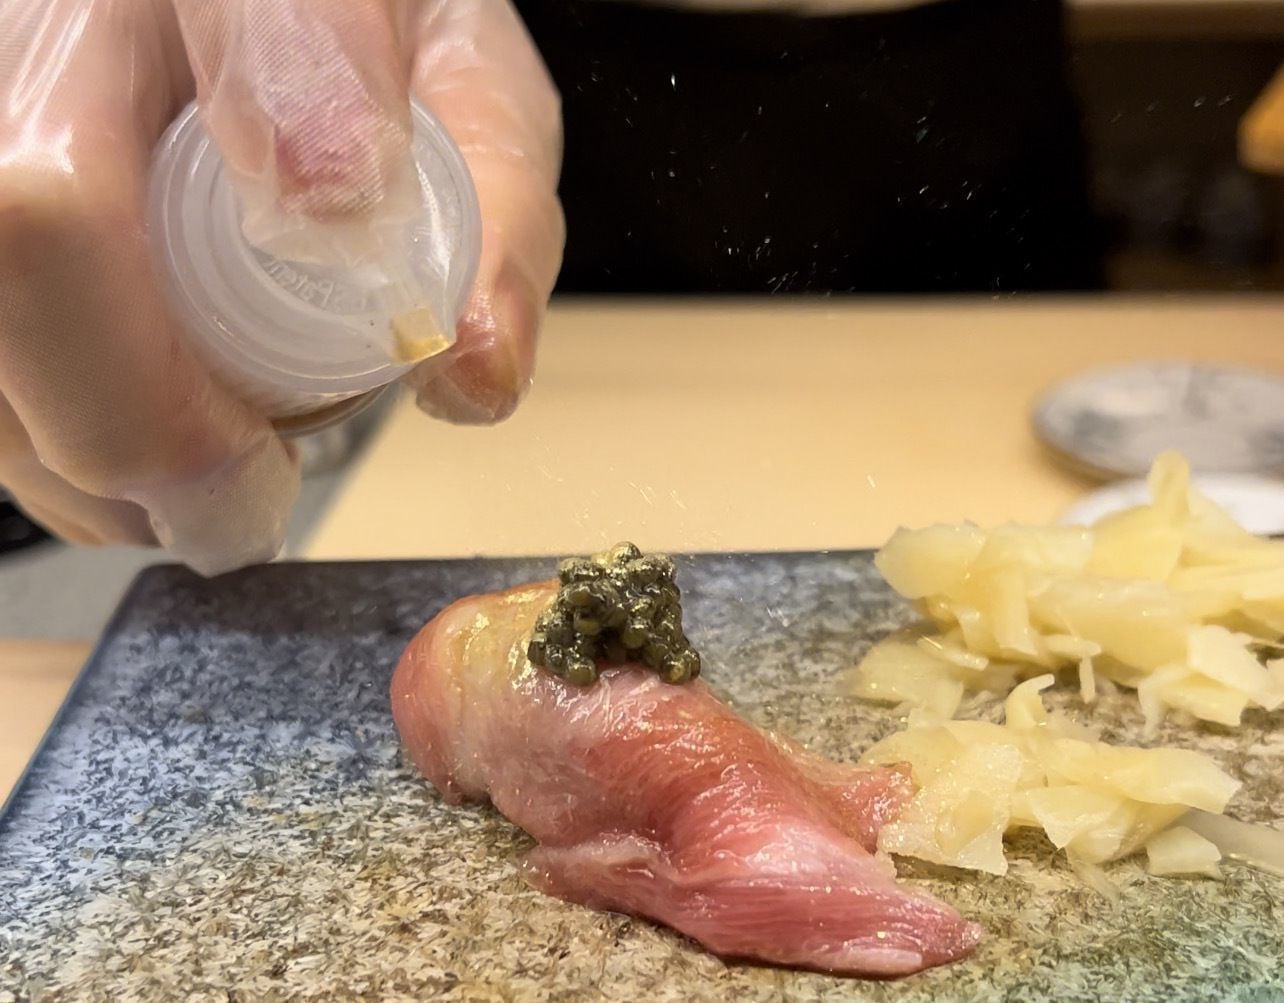 Kichi Omakase offers a 15-course sushi dinner in only an hour